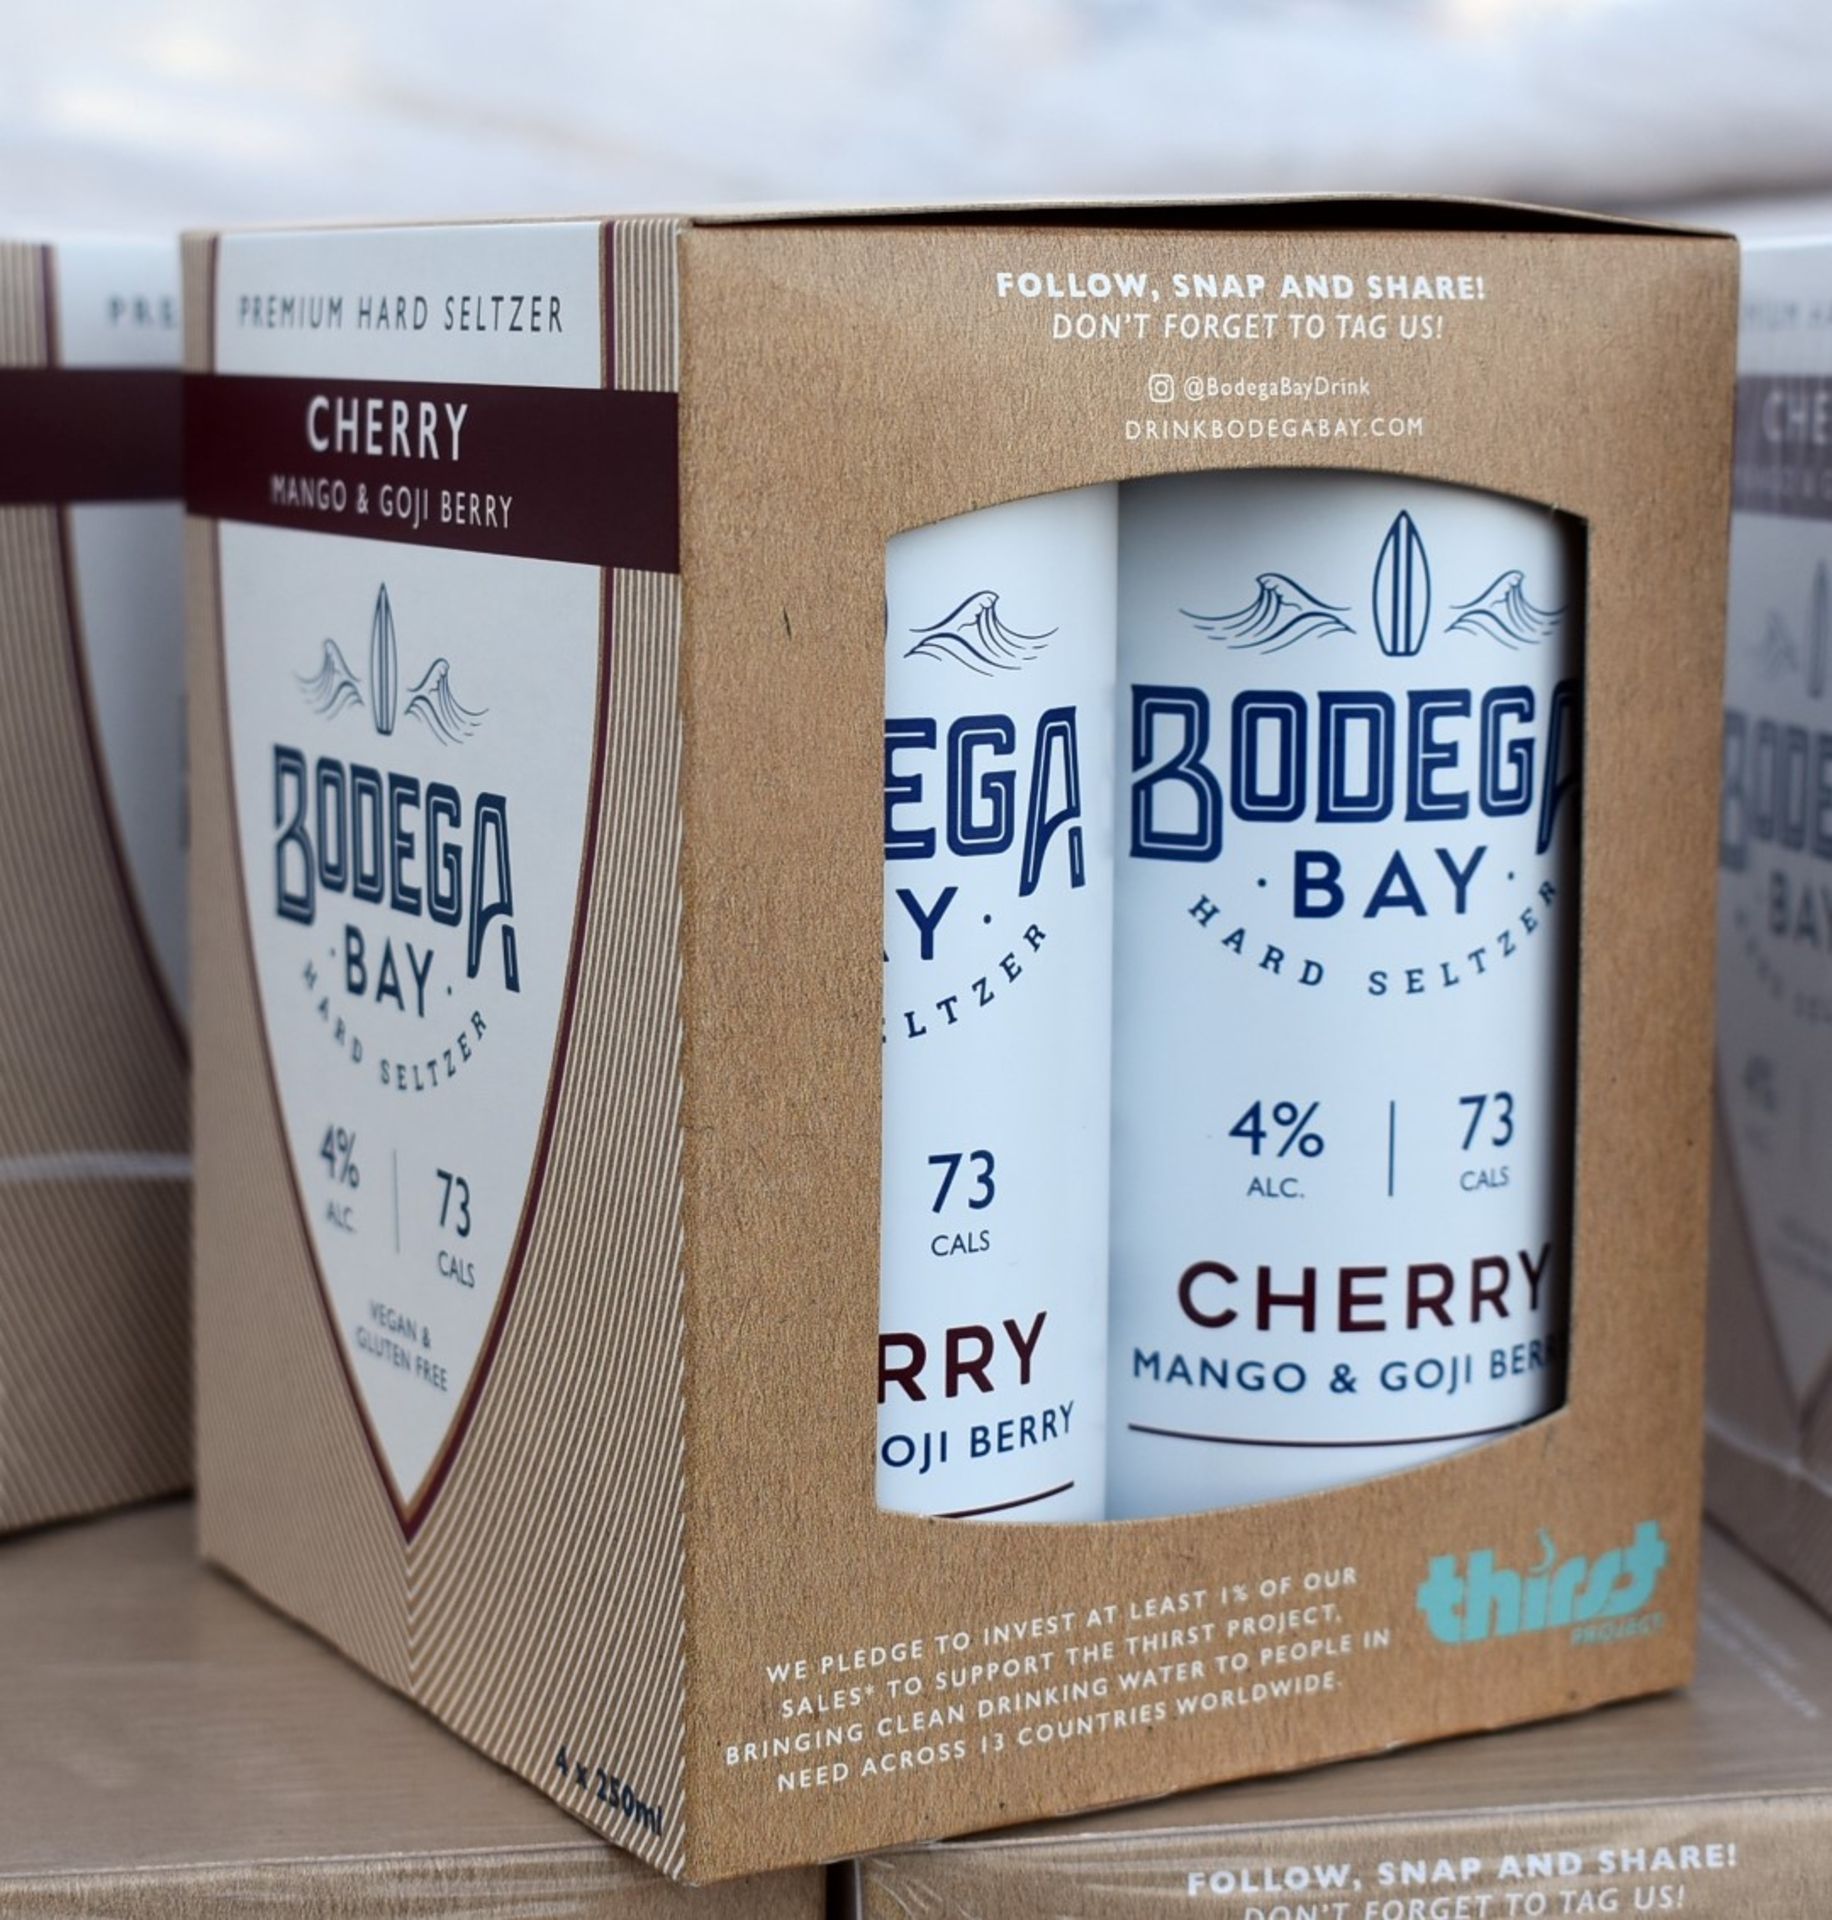 360 x Cans of Bodega Bay Hard Seltzer 250ml Alcoholic Sparkling Water Drinks - Various Flavours - Image 12 of 15